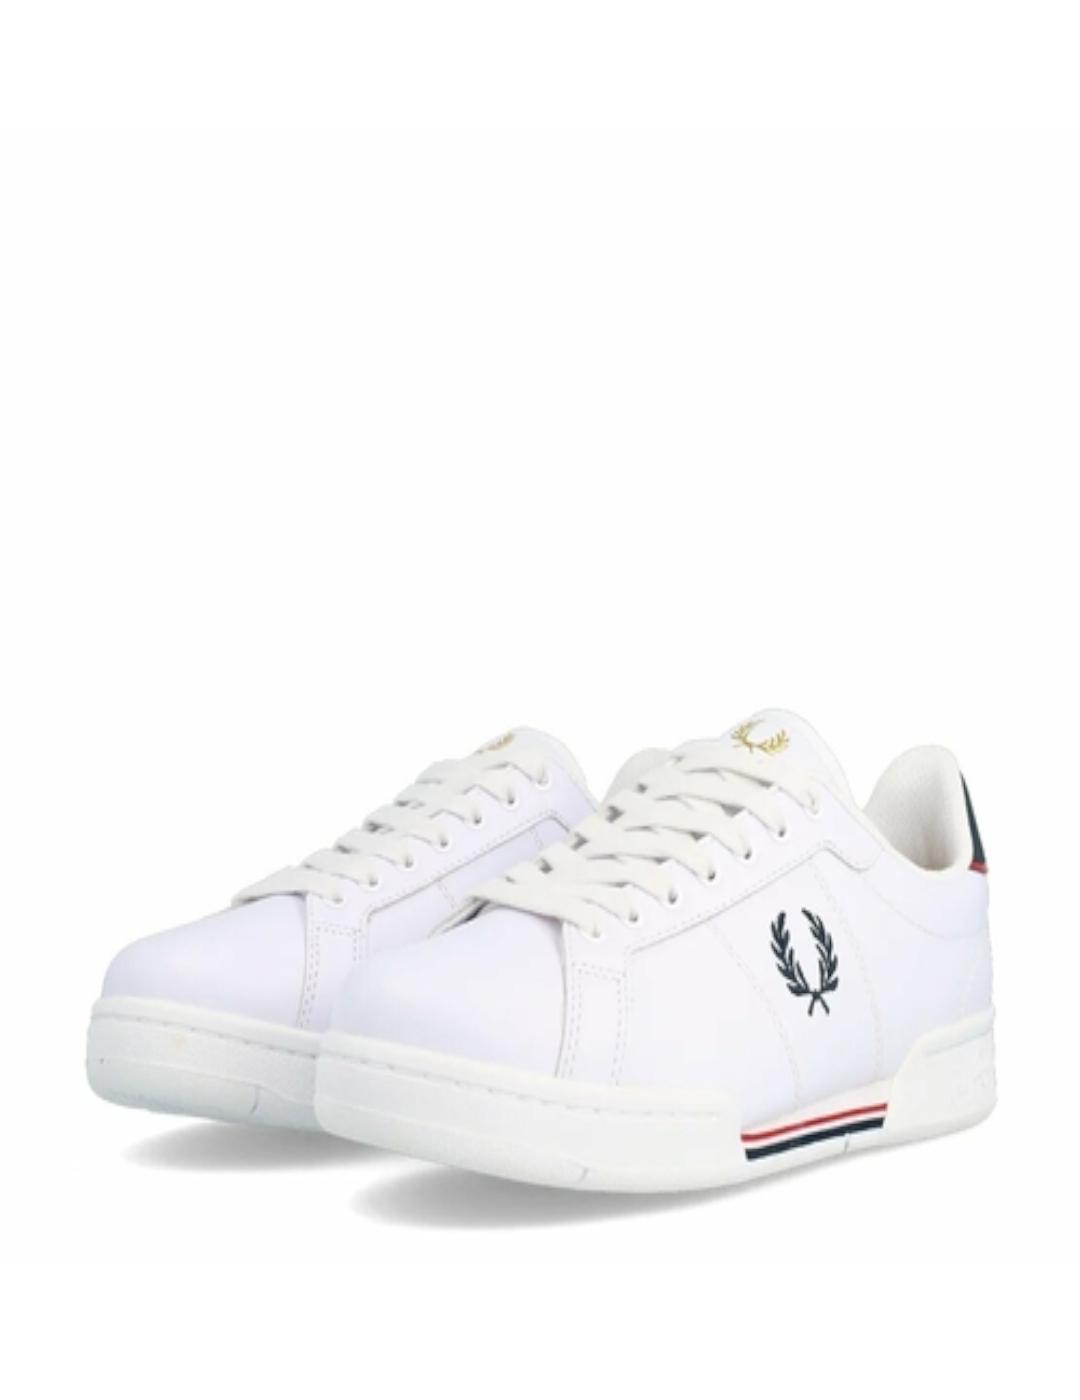 Deportiva Fred Perry blanca con ribetes colores